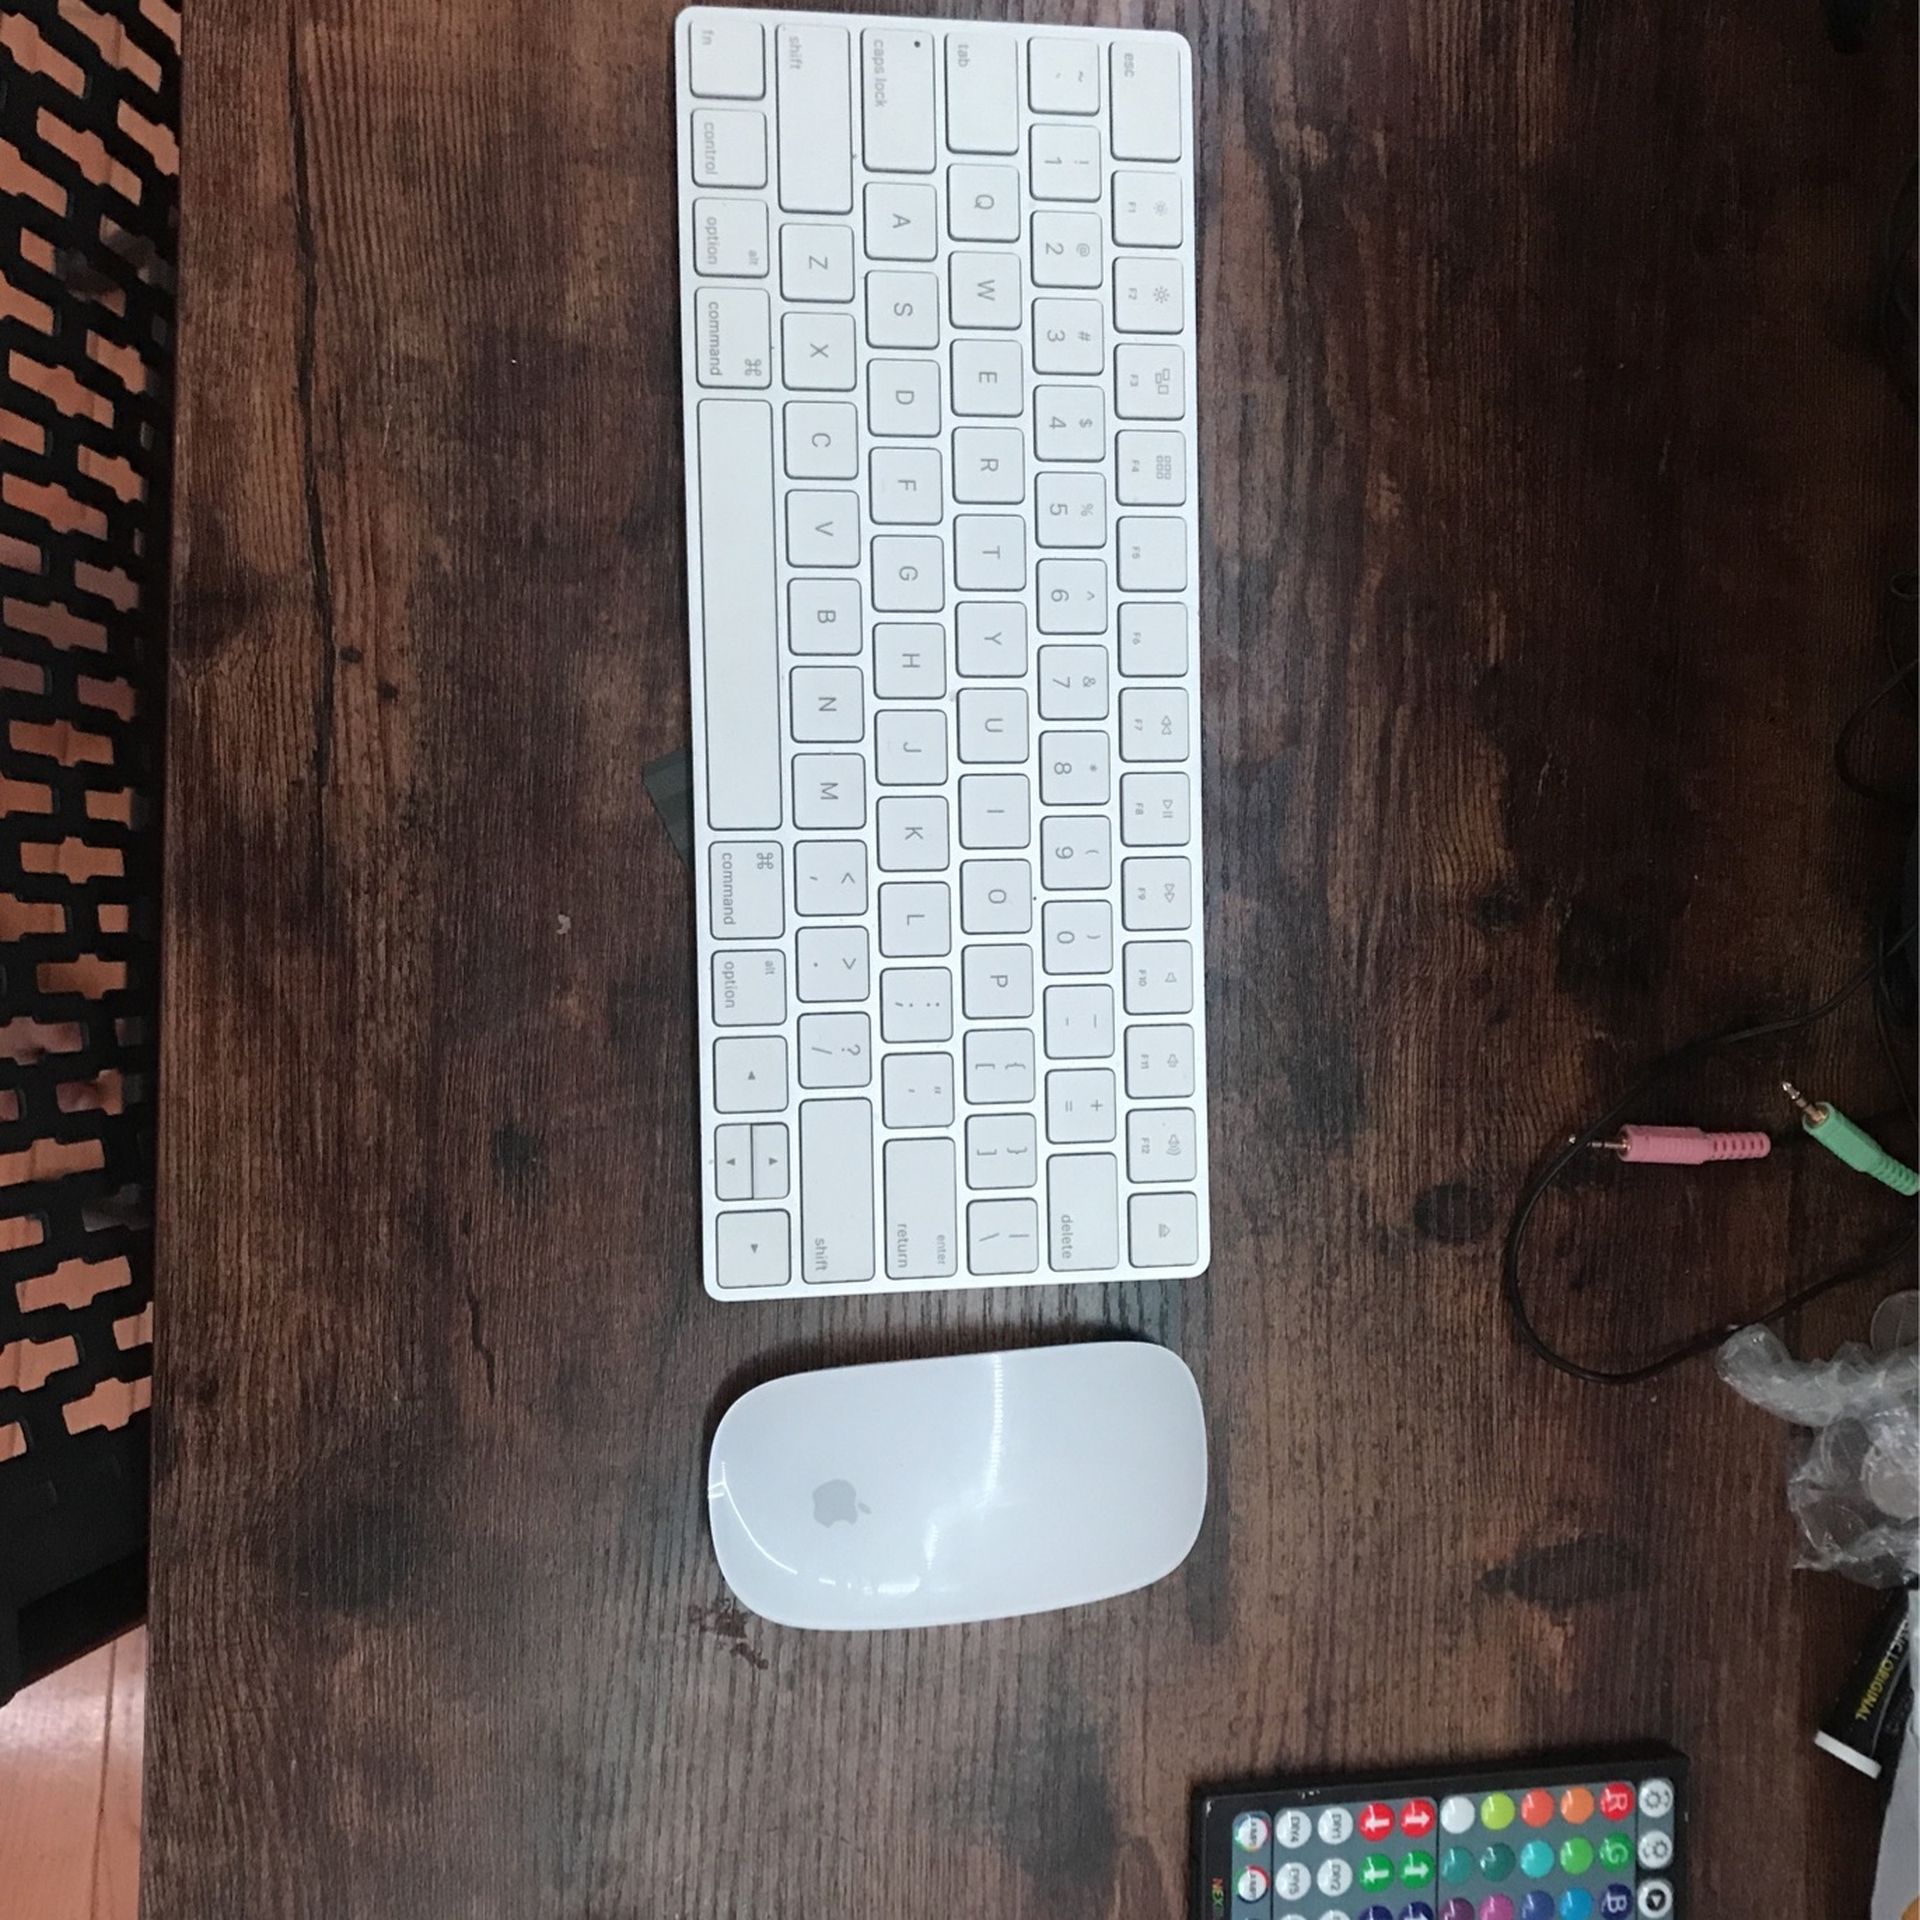 Apple Keyboard And Apple Mouse /Wireless